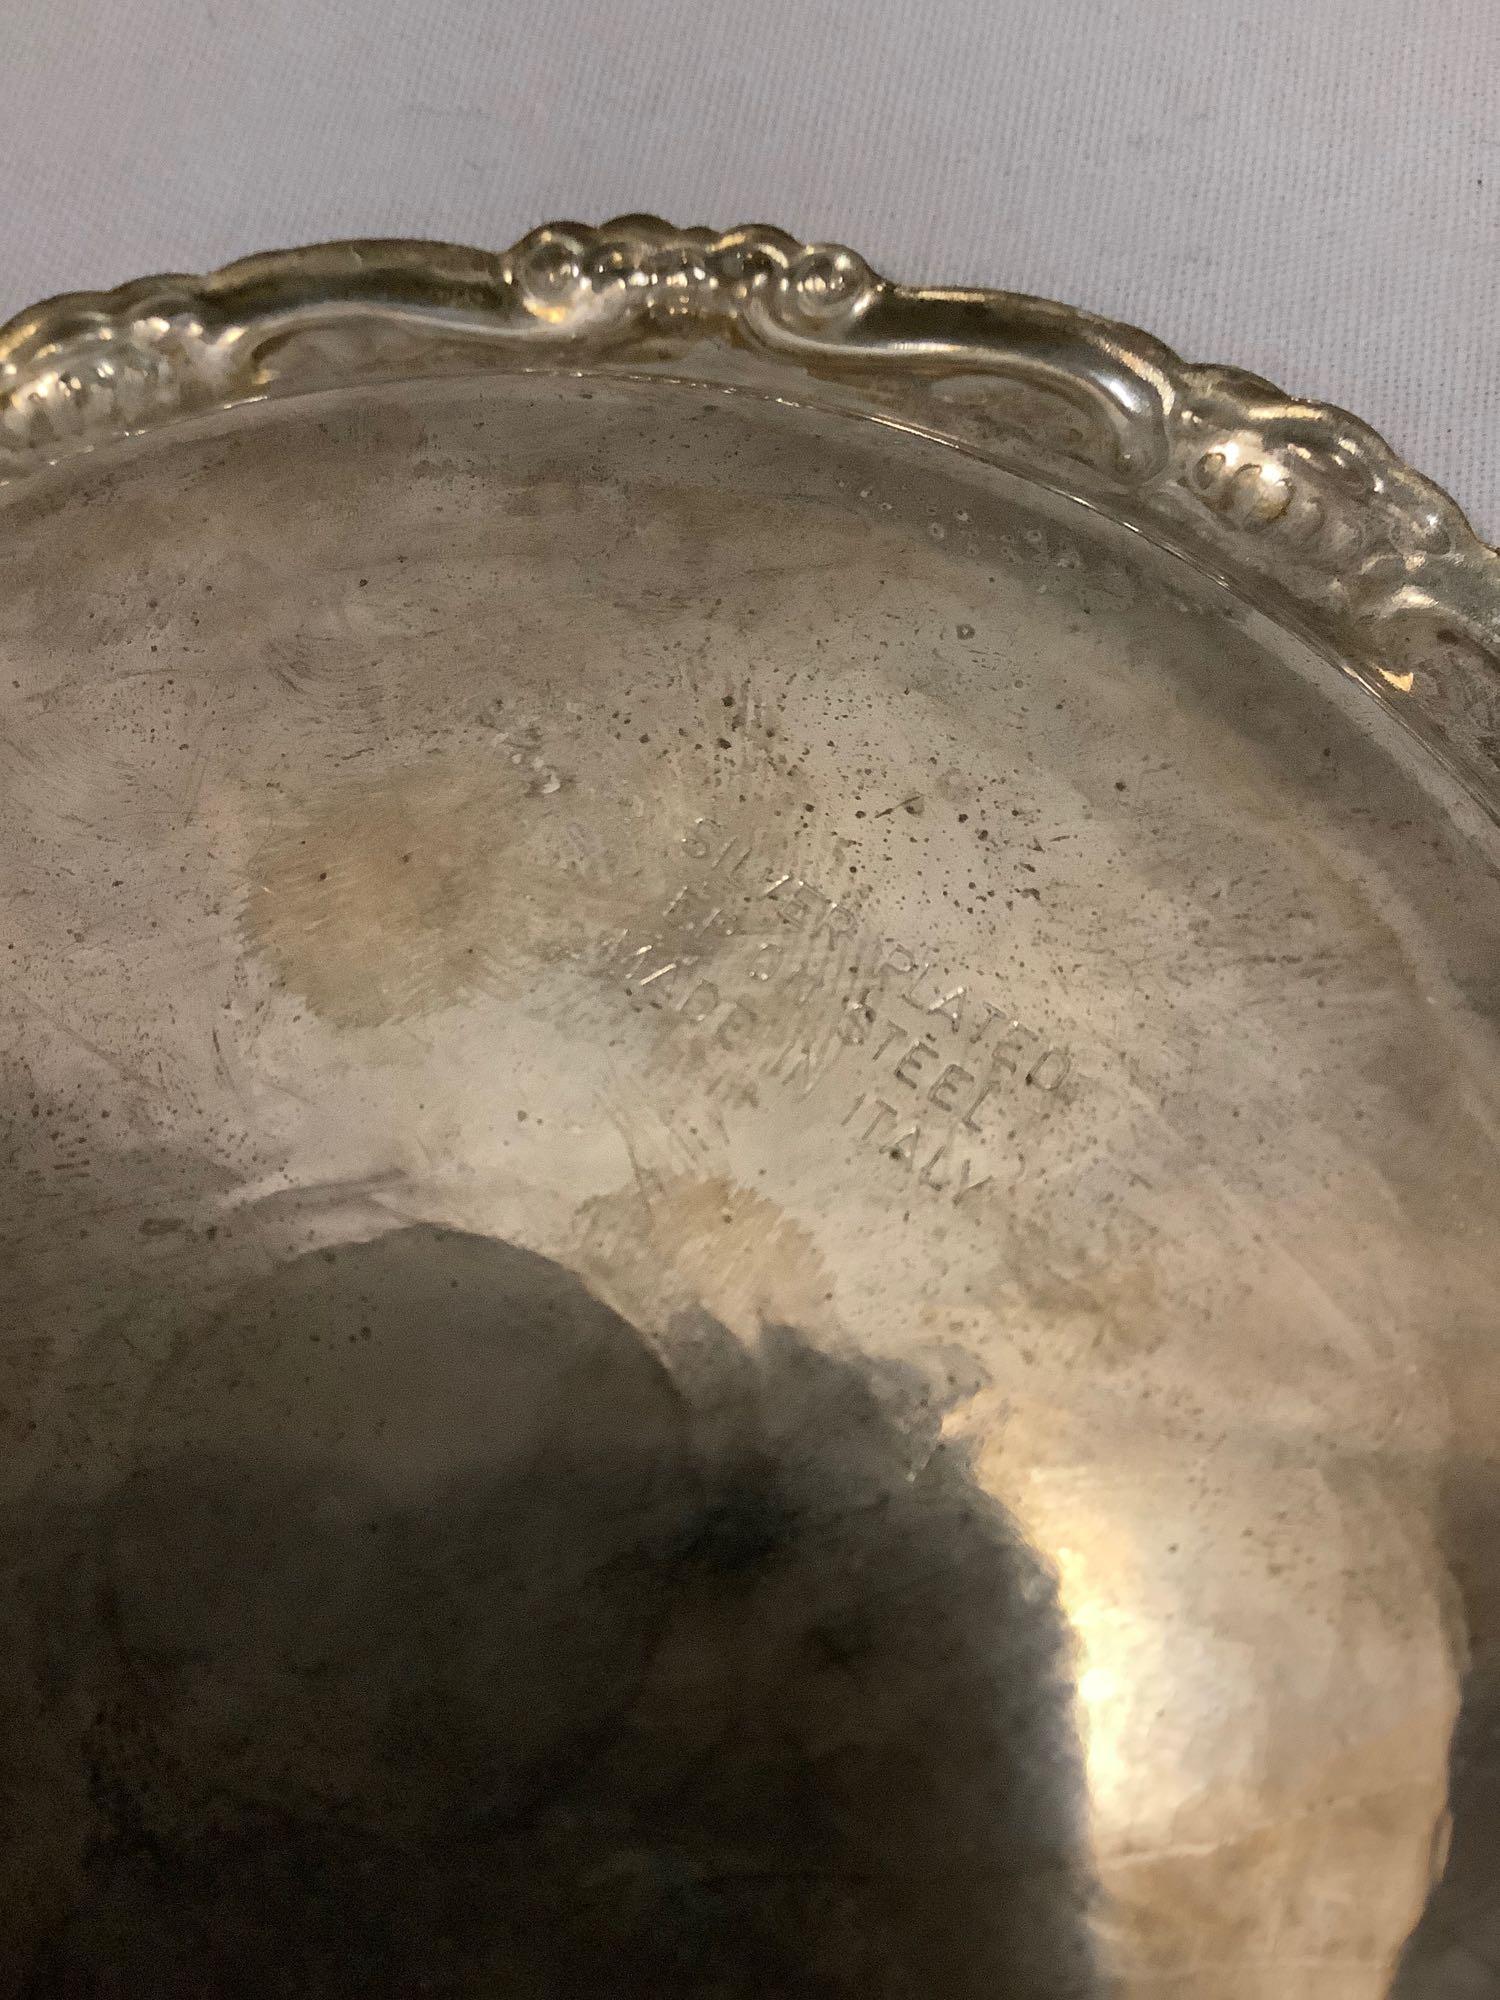 14 pieces of silver plate tableware. Sheridan, Neco, Lovelace, and more.